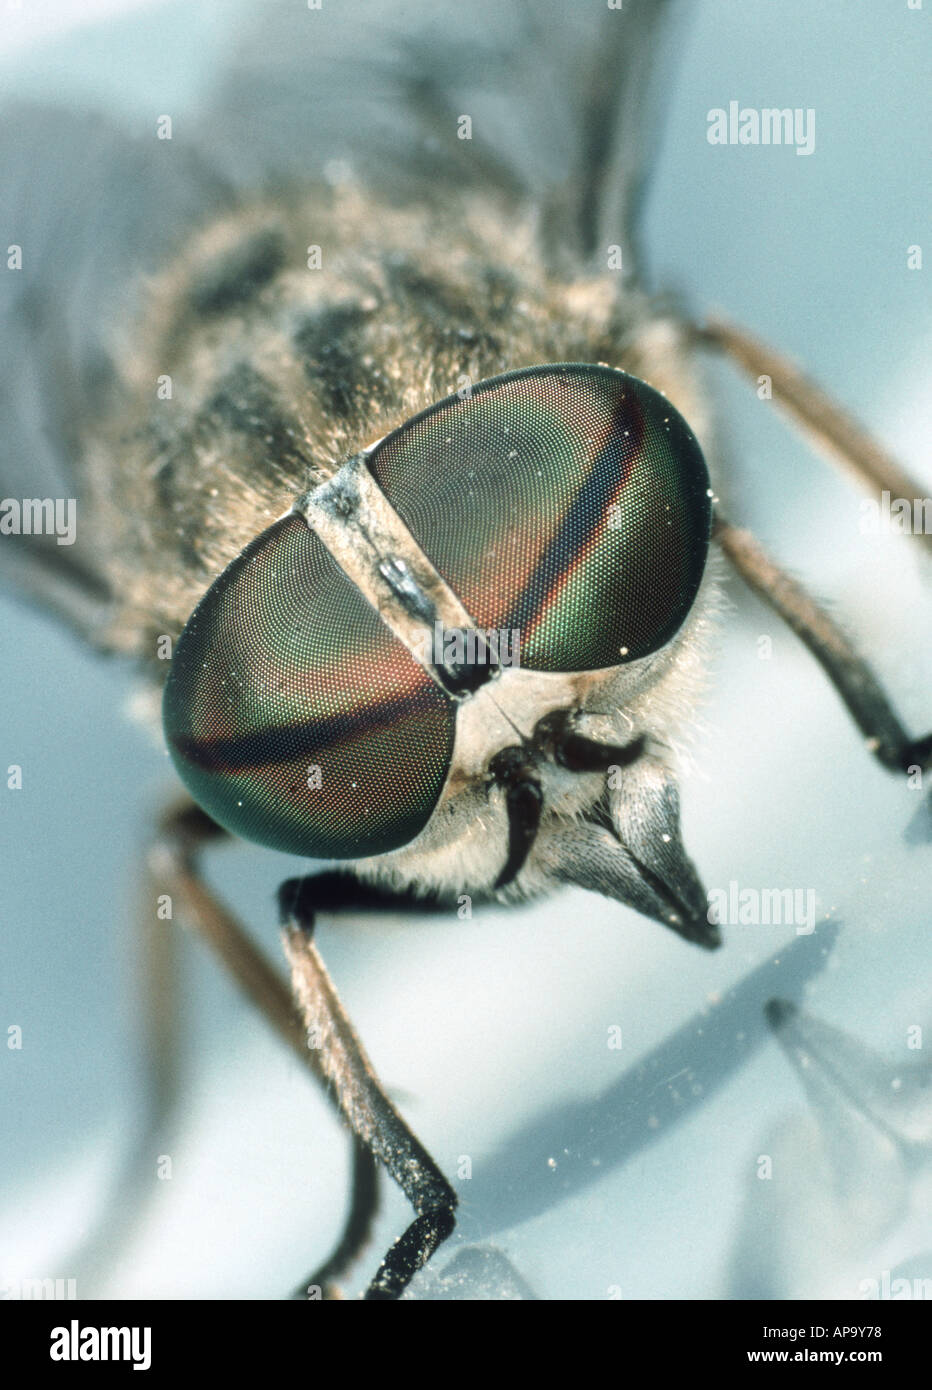 Horse fly Tabanus sp head showing biting mouthparts and compound eyes Stock Photo